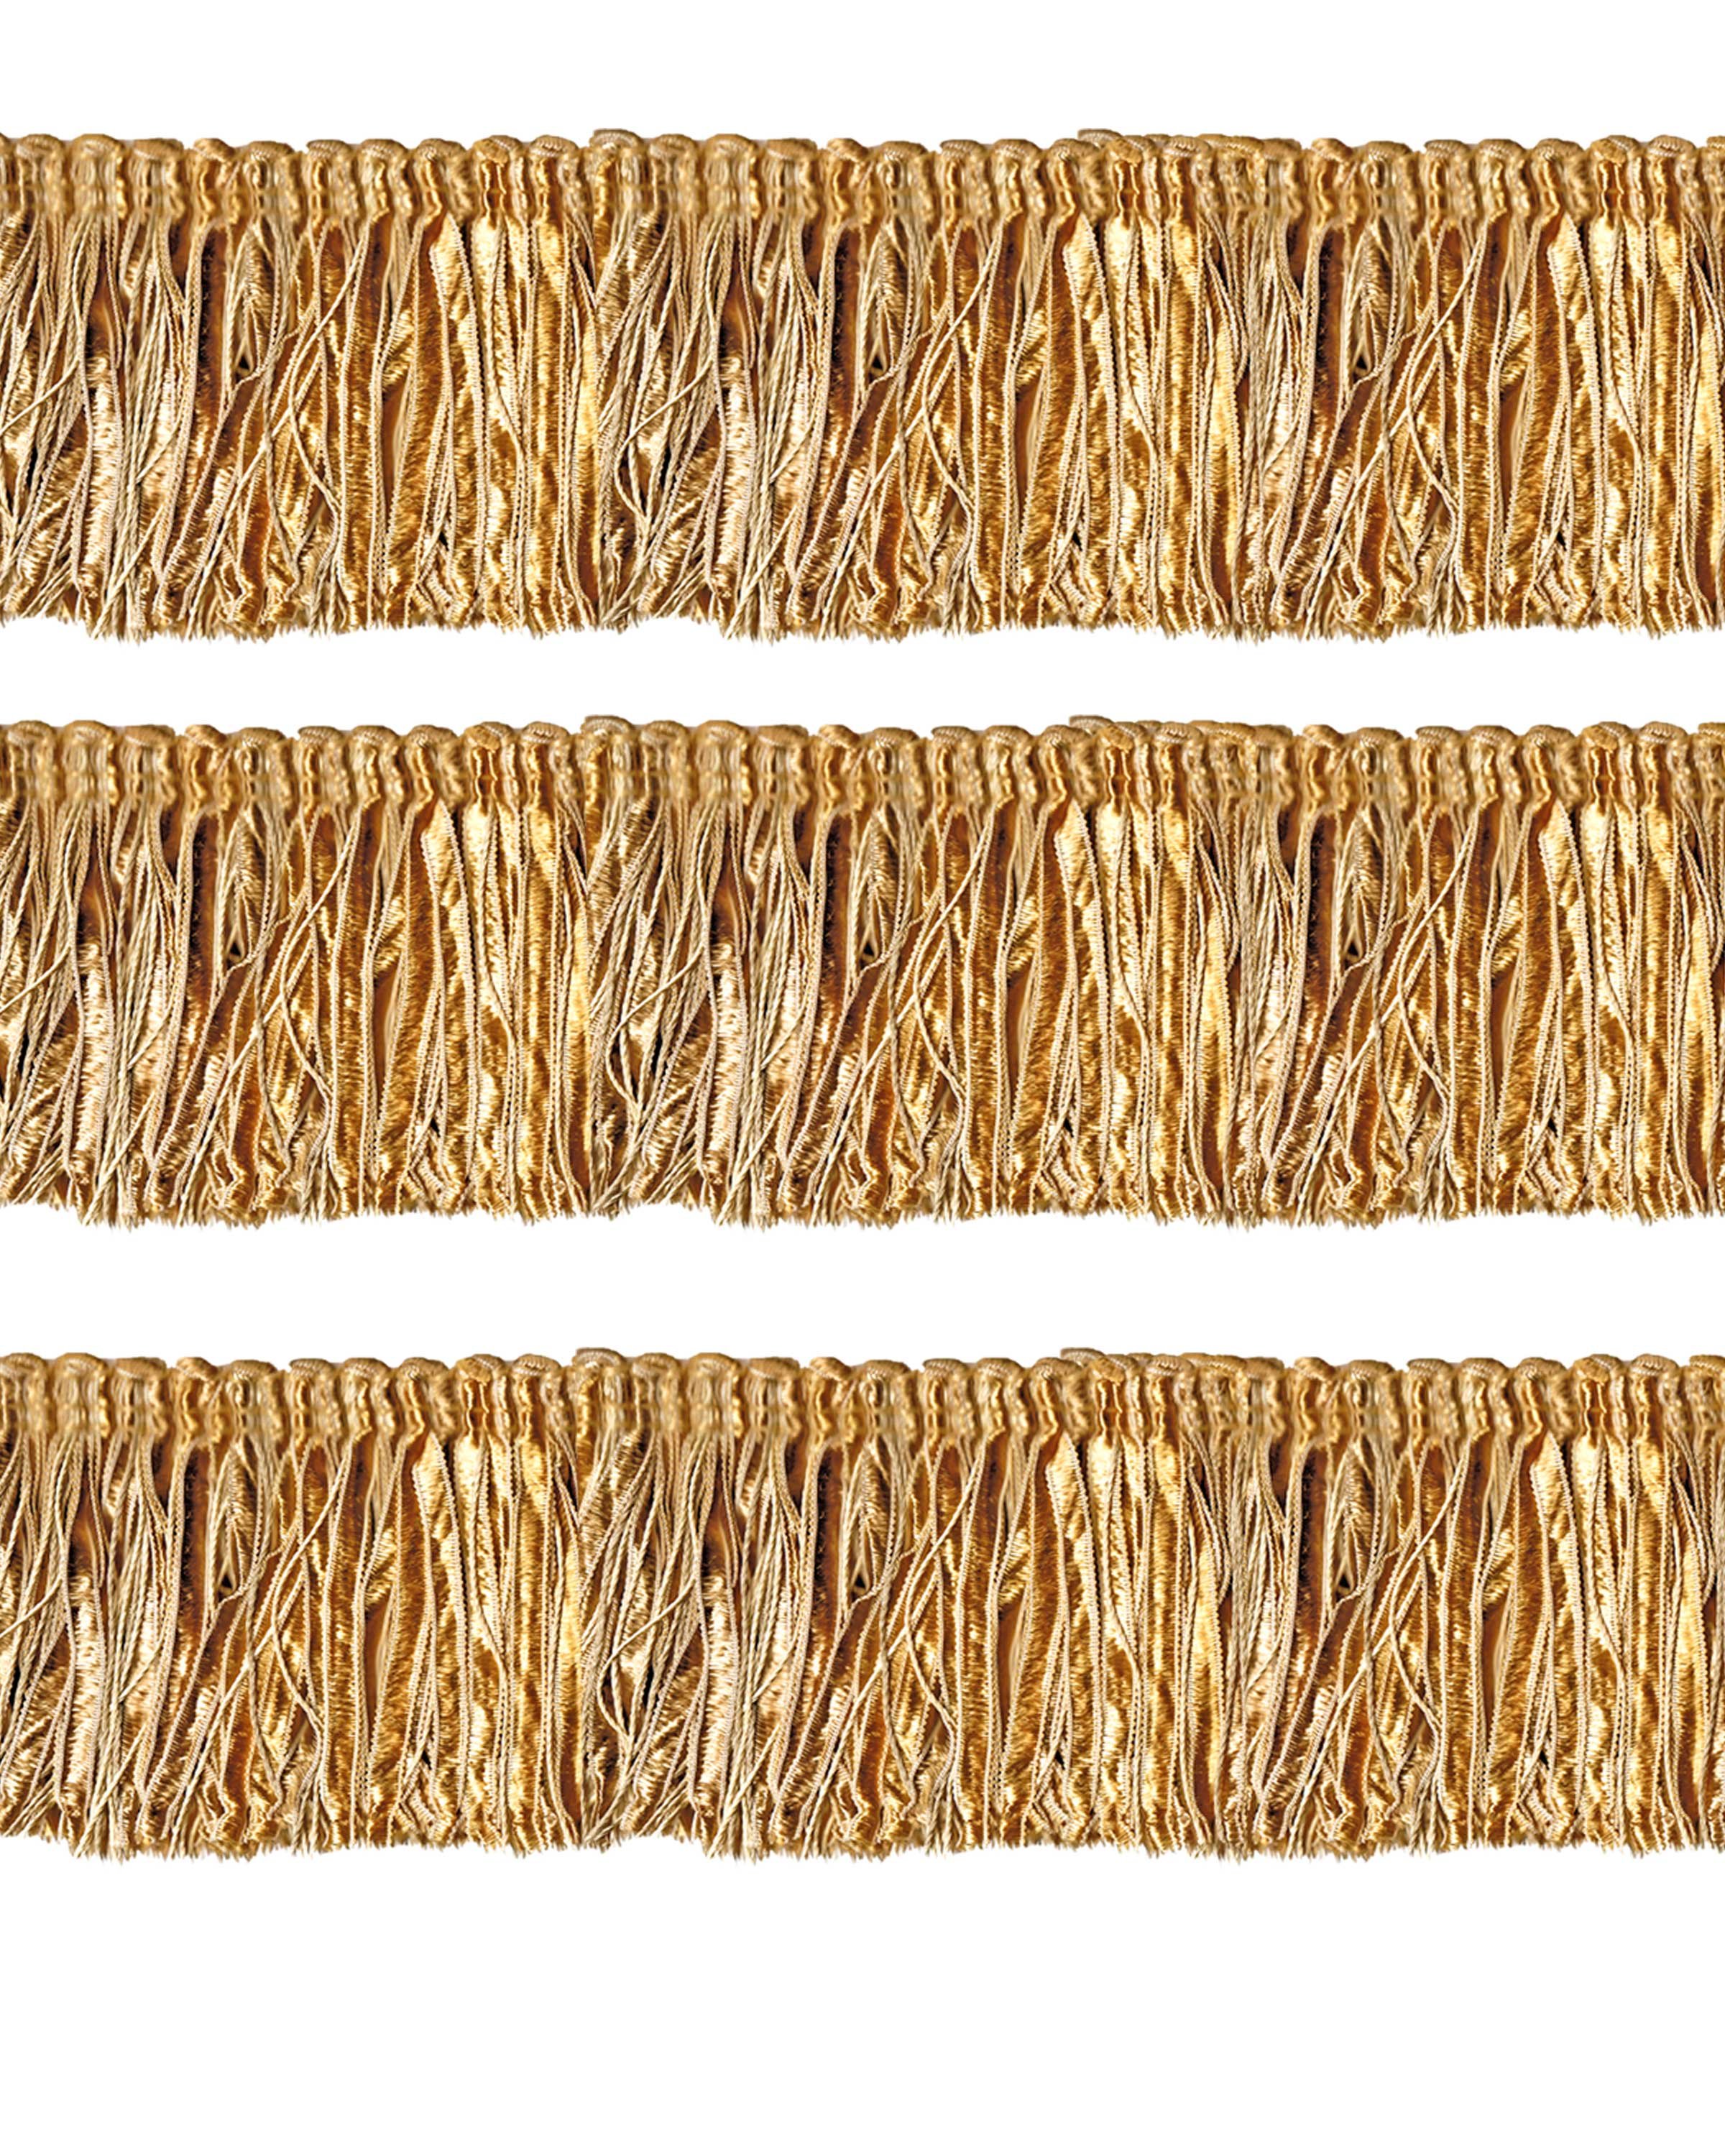 Bullion Fringe with Ribbons - Gold 60mm Price is for 5 metres